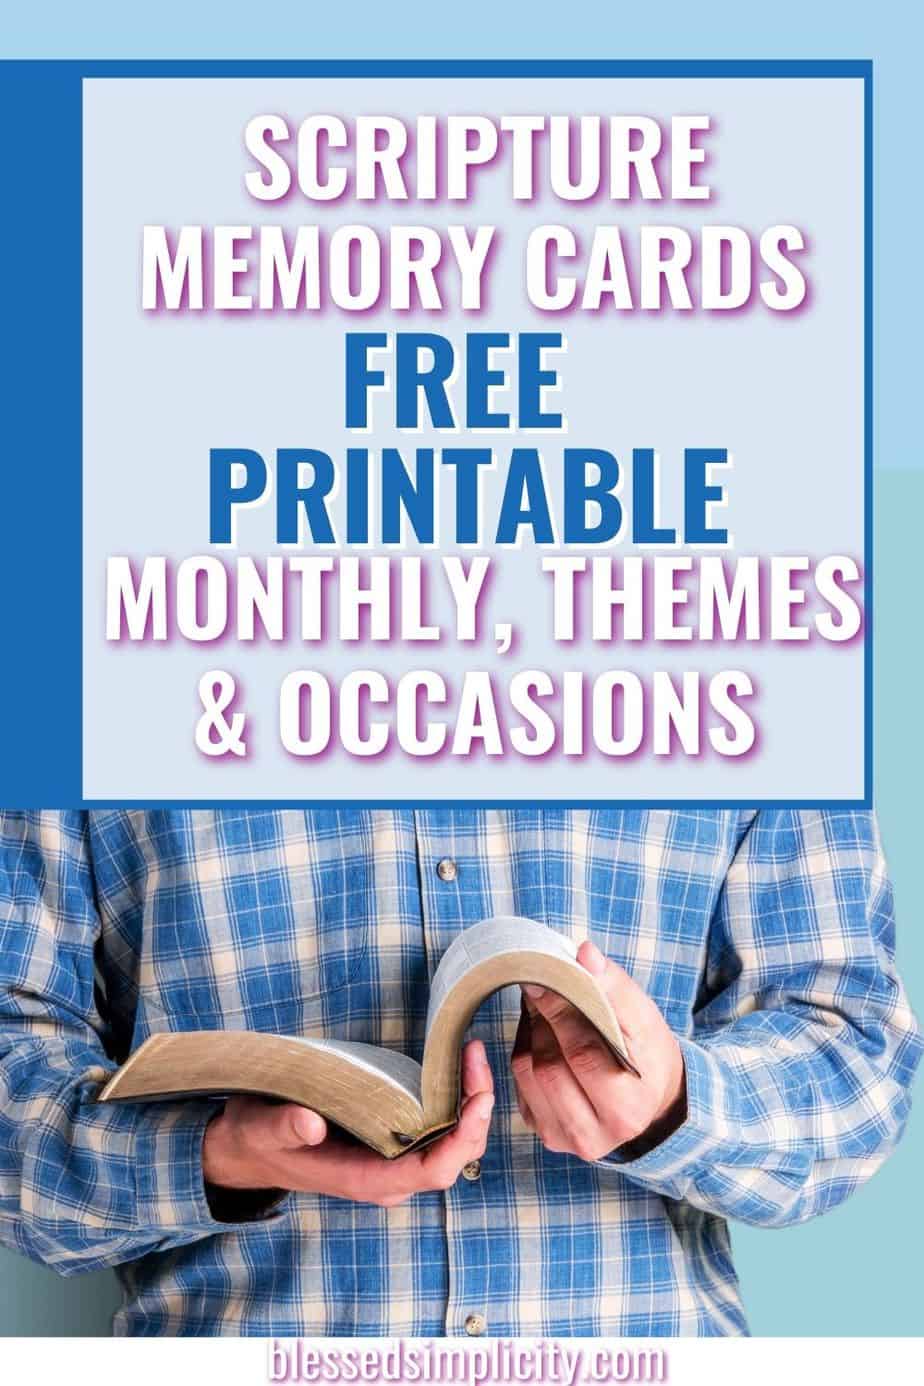 free-printable-scripture-memory-cards-blessed-simplicity